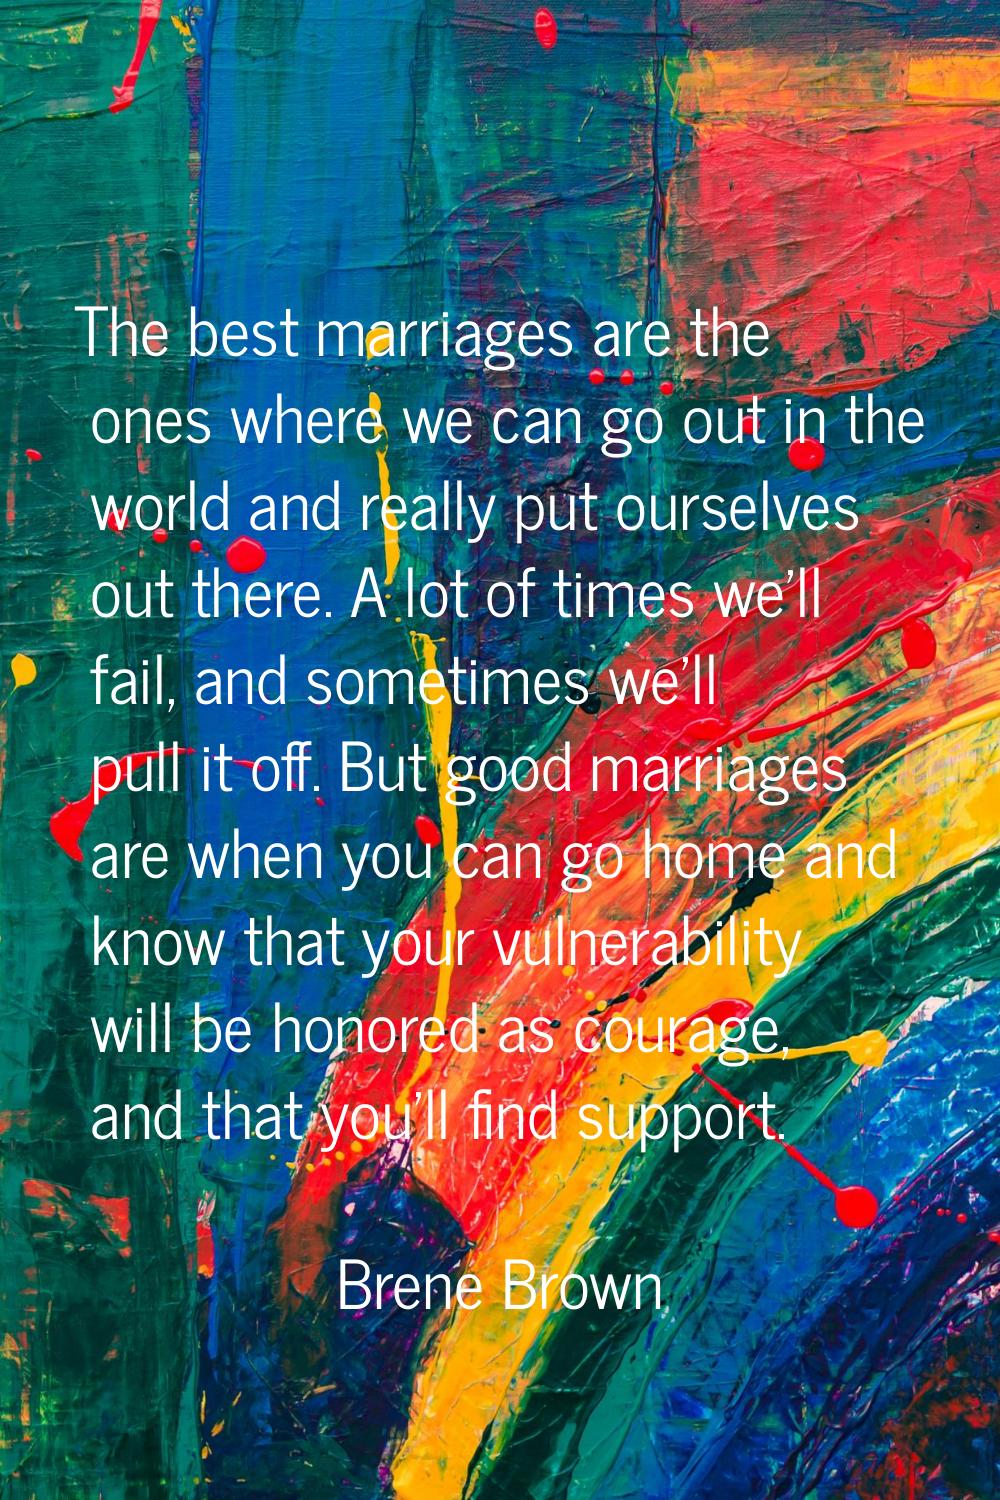 The best marriages are the ones where we can go out in the world and really put ourselves out there